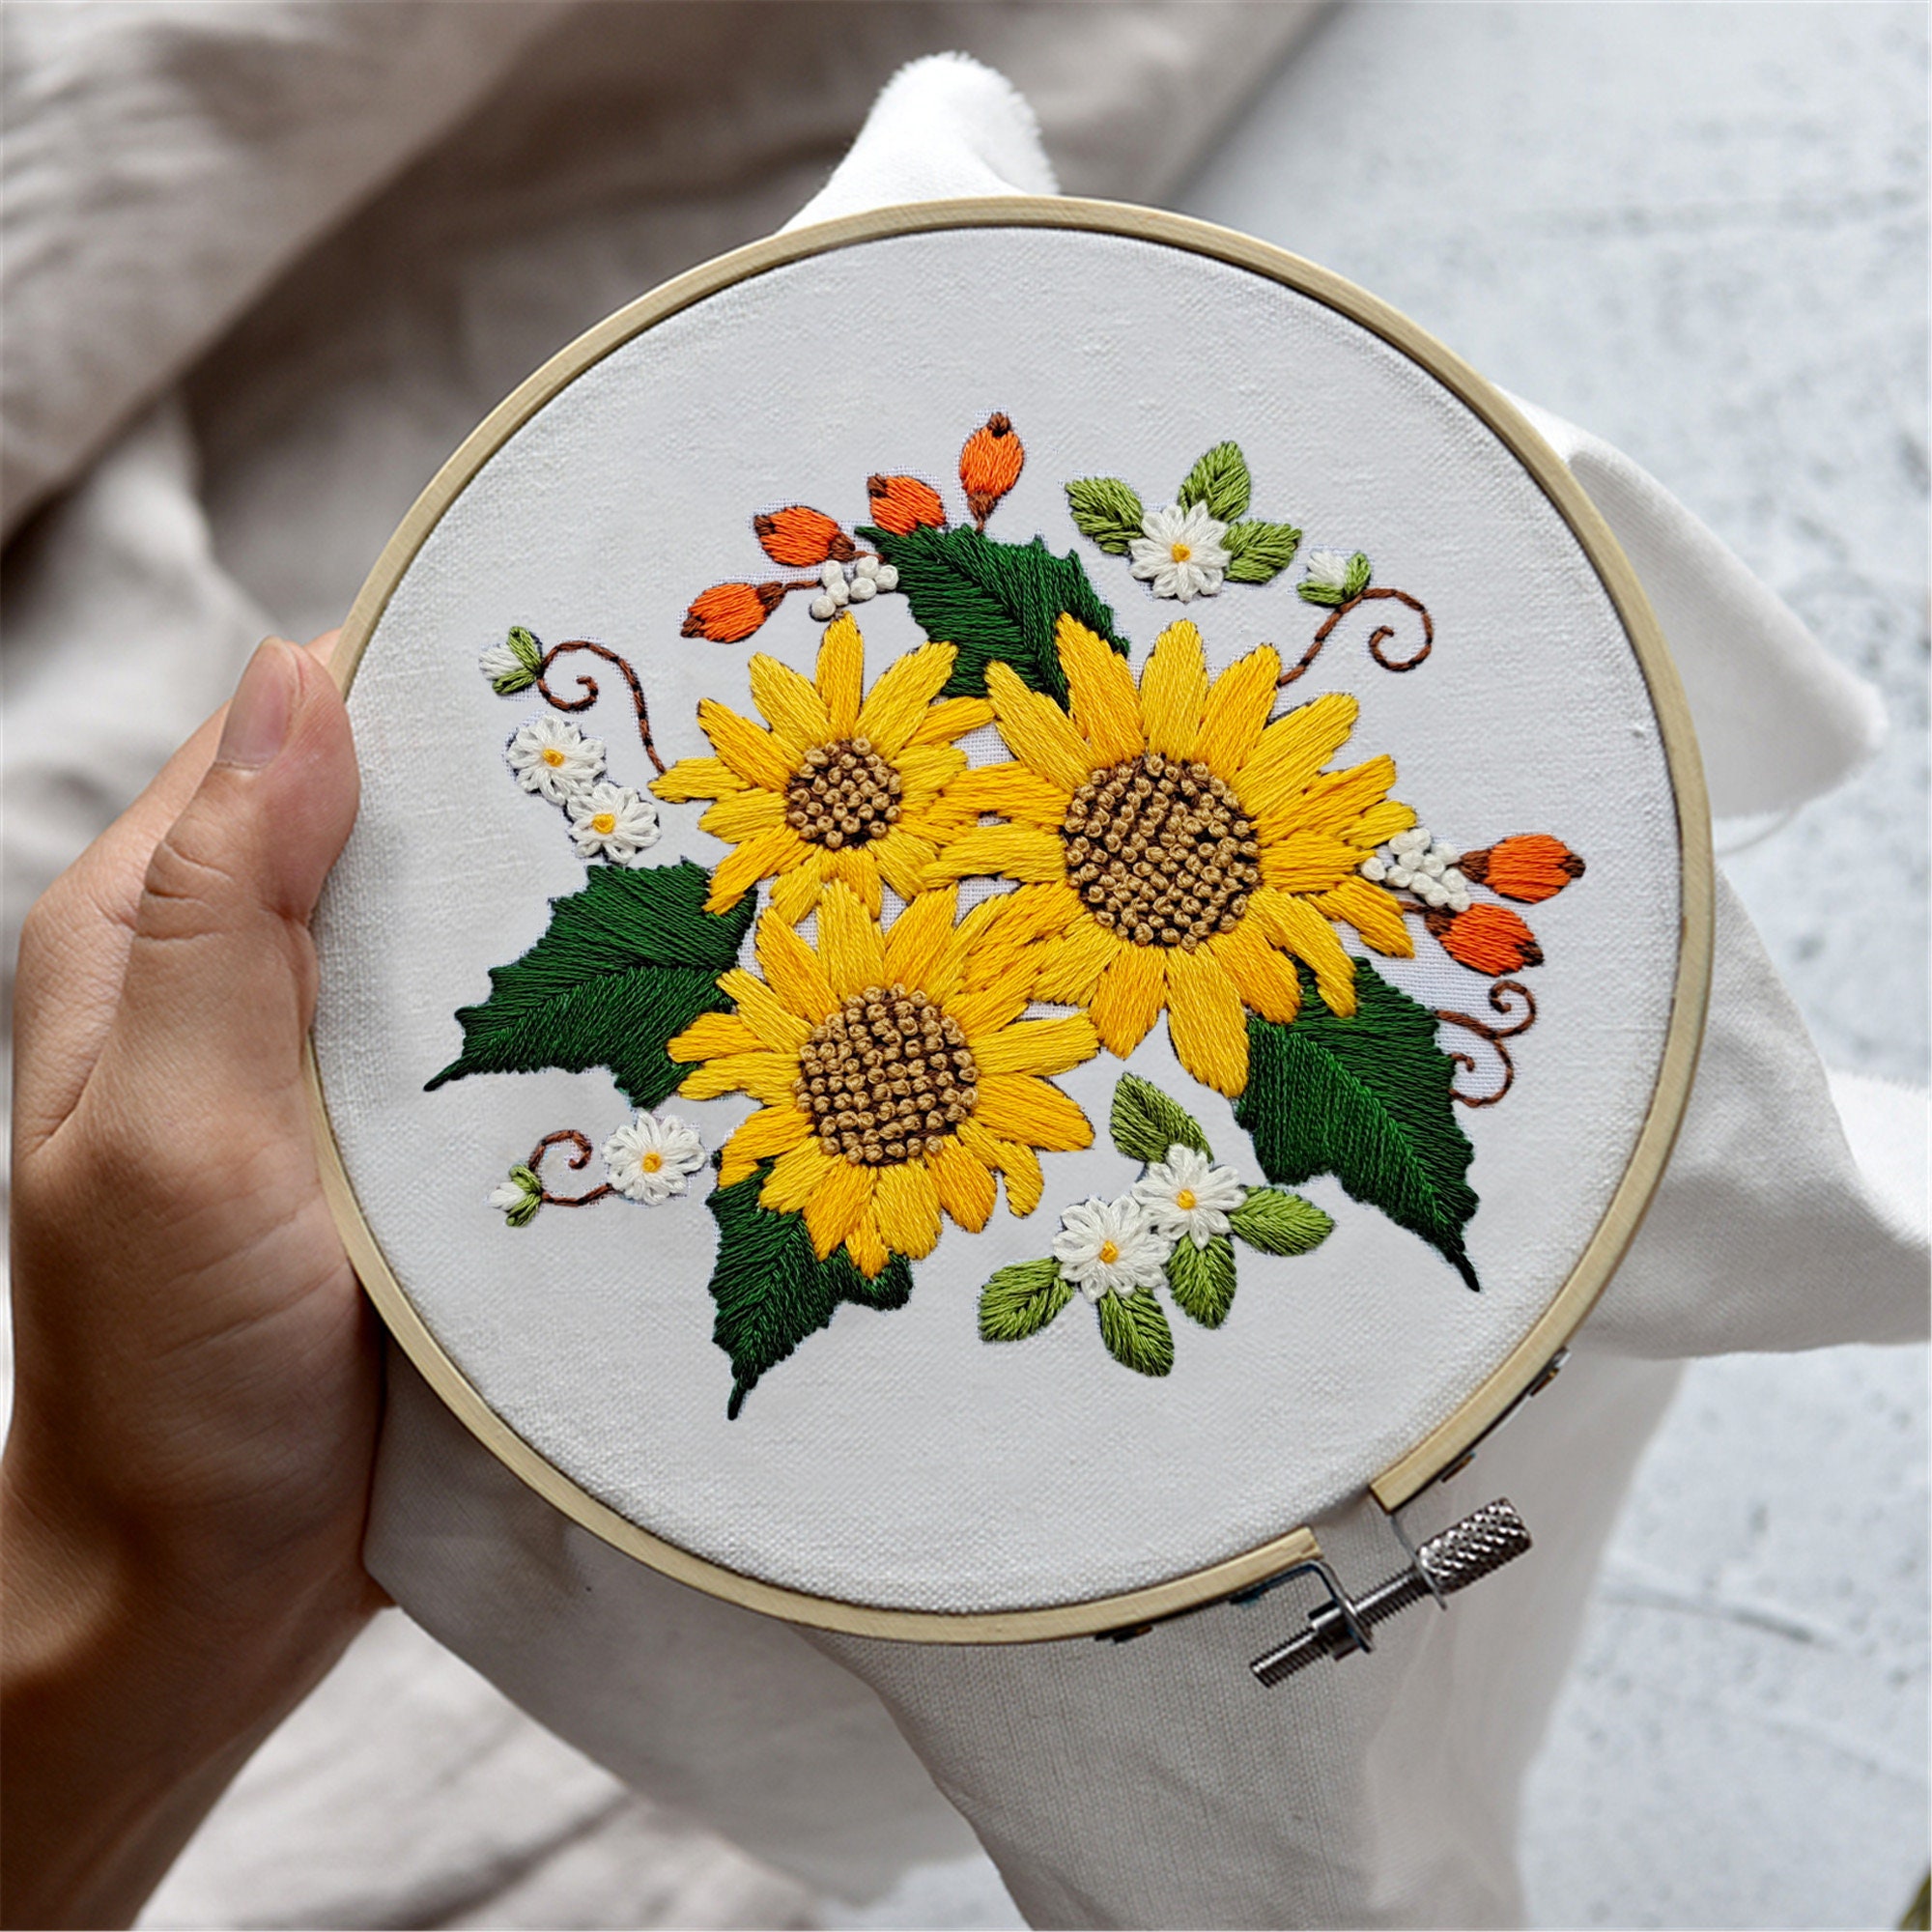 Diamond painting kit - Little sunflower Embroidery Mosaic Cross Stitch Full  Square - Price, description and photos ➽ Inspiration Crafts